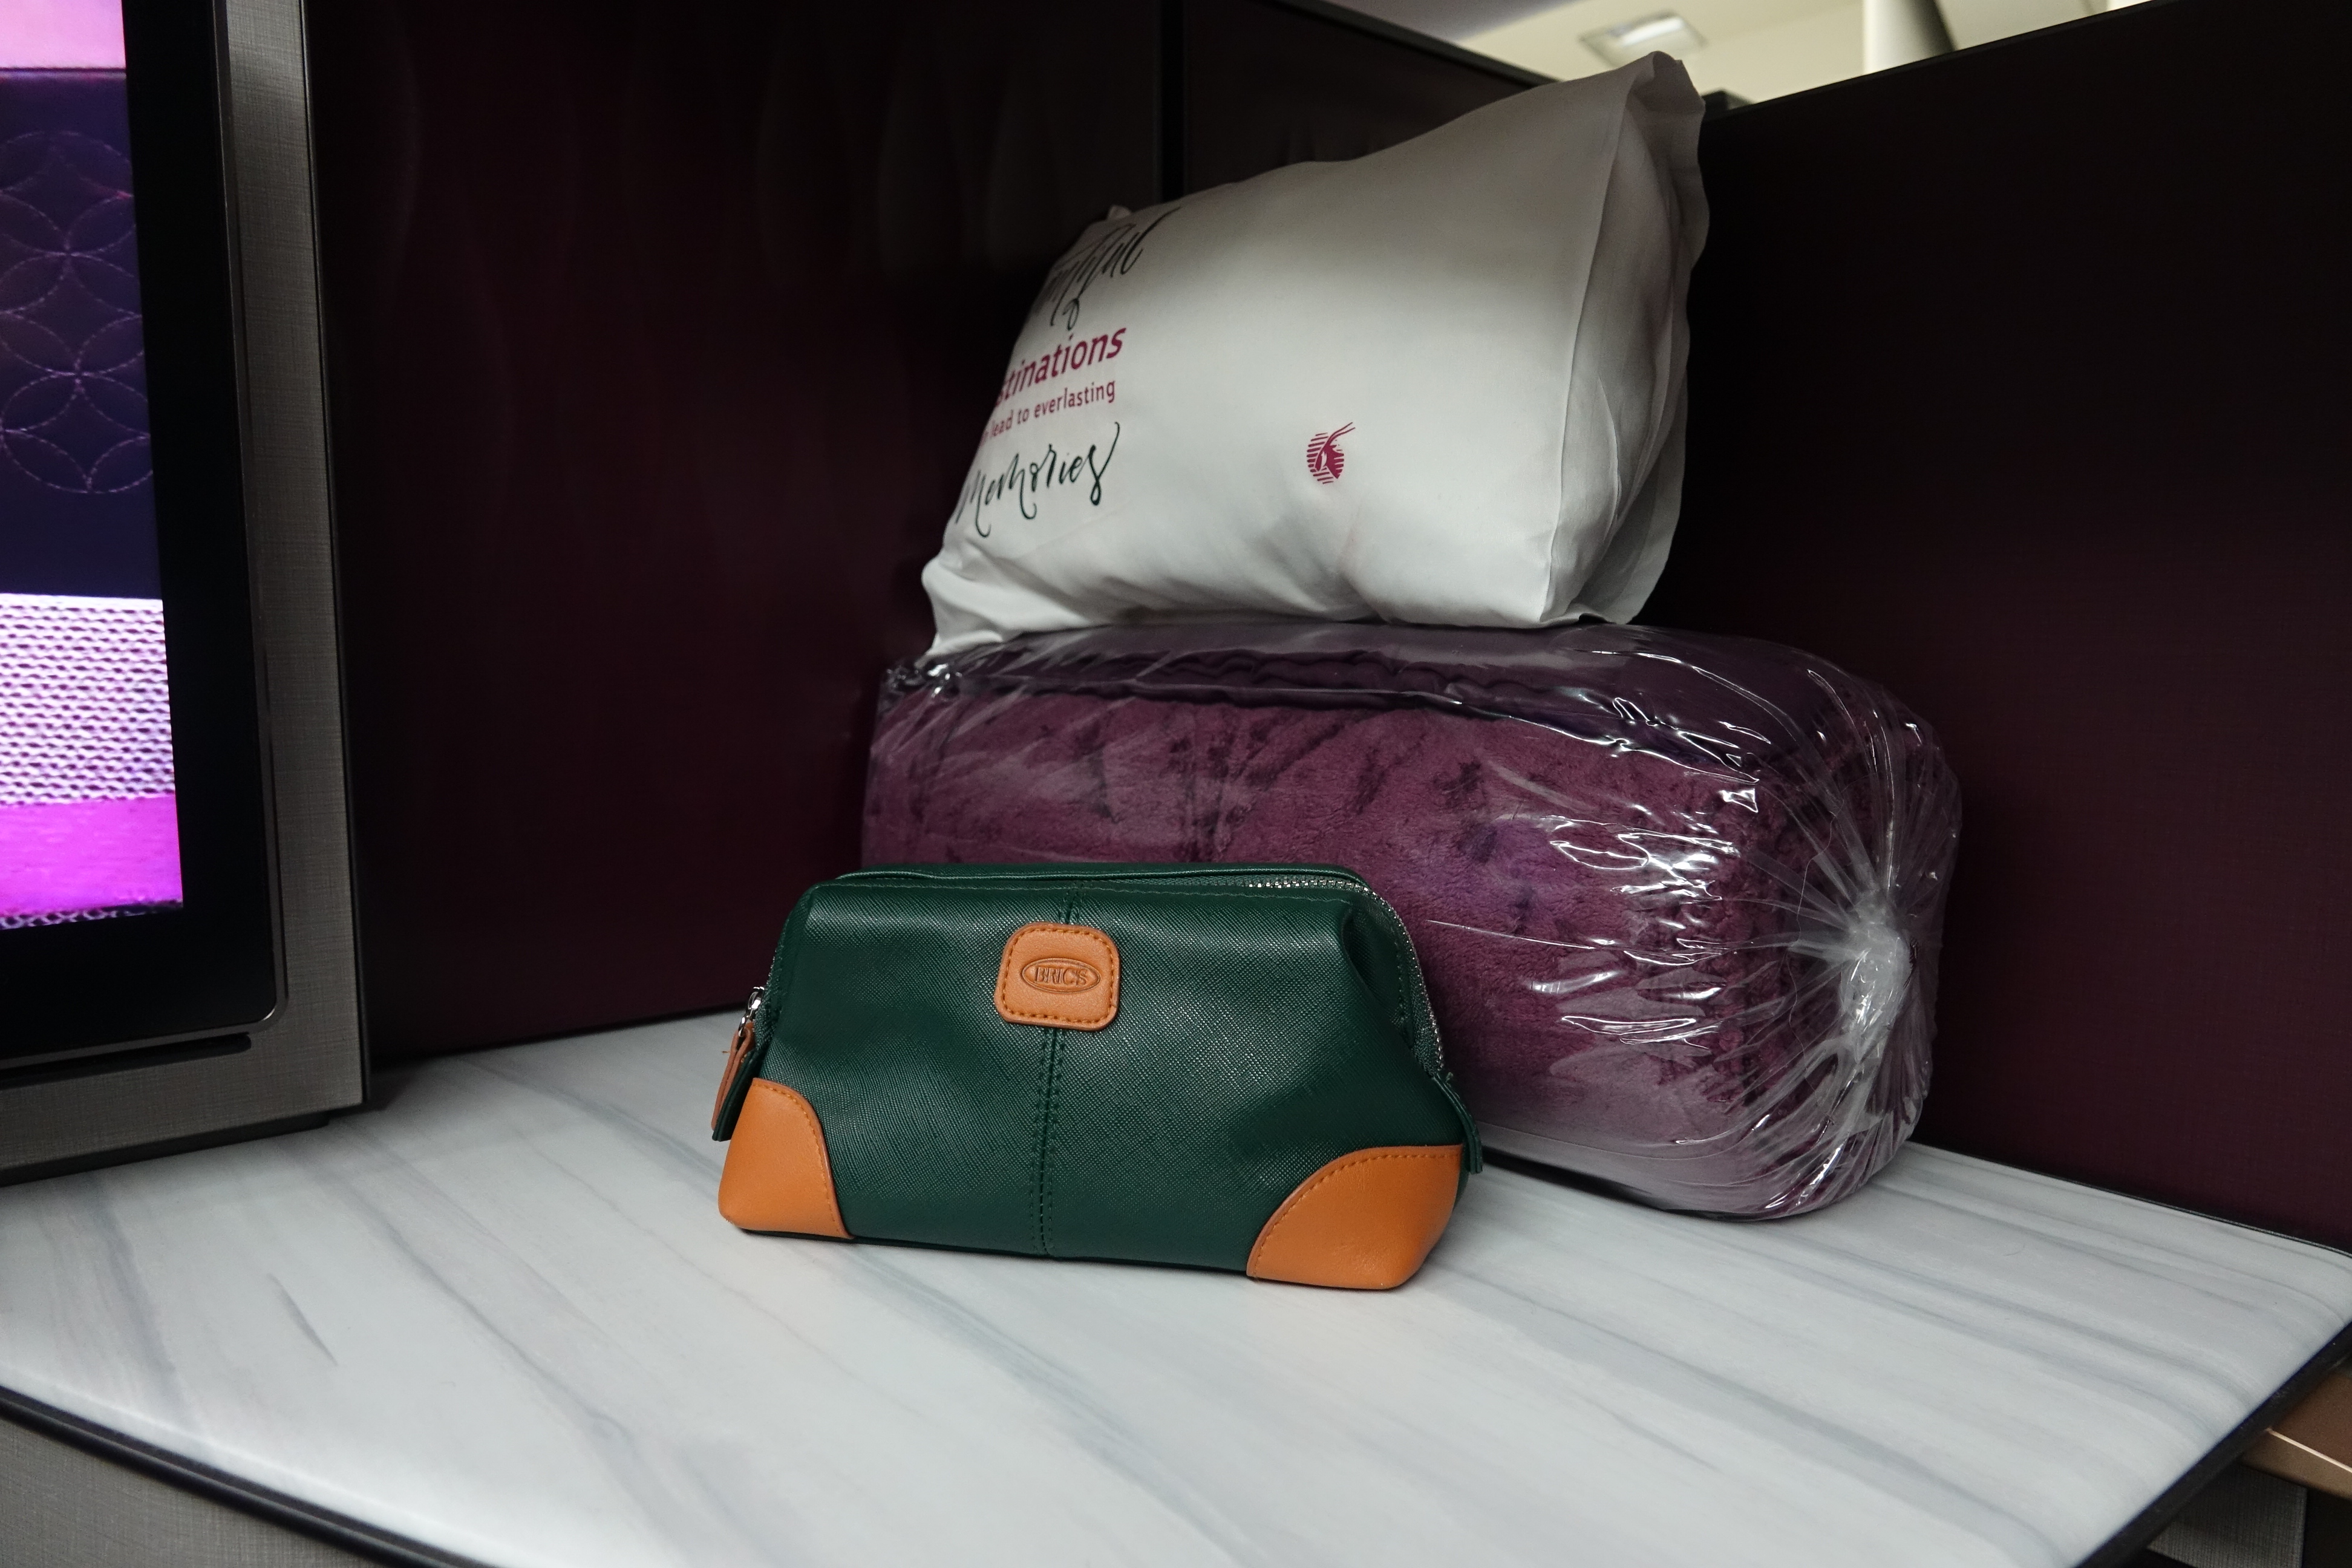 a green and white purse next to a purple pillow